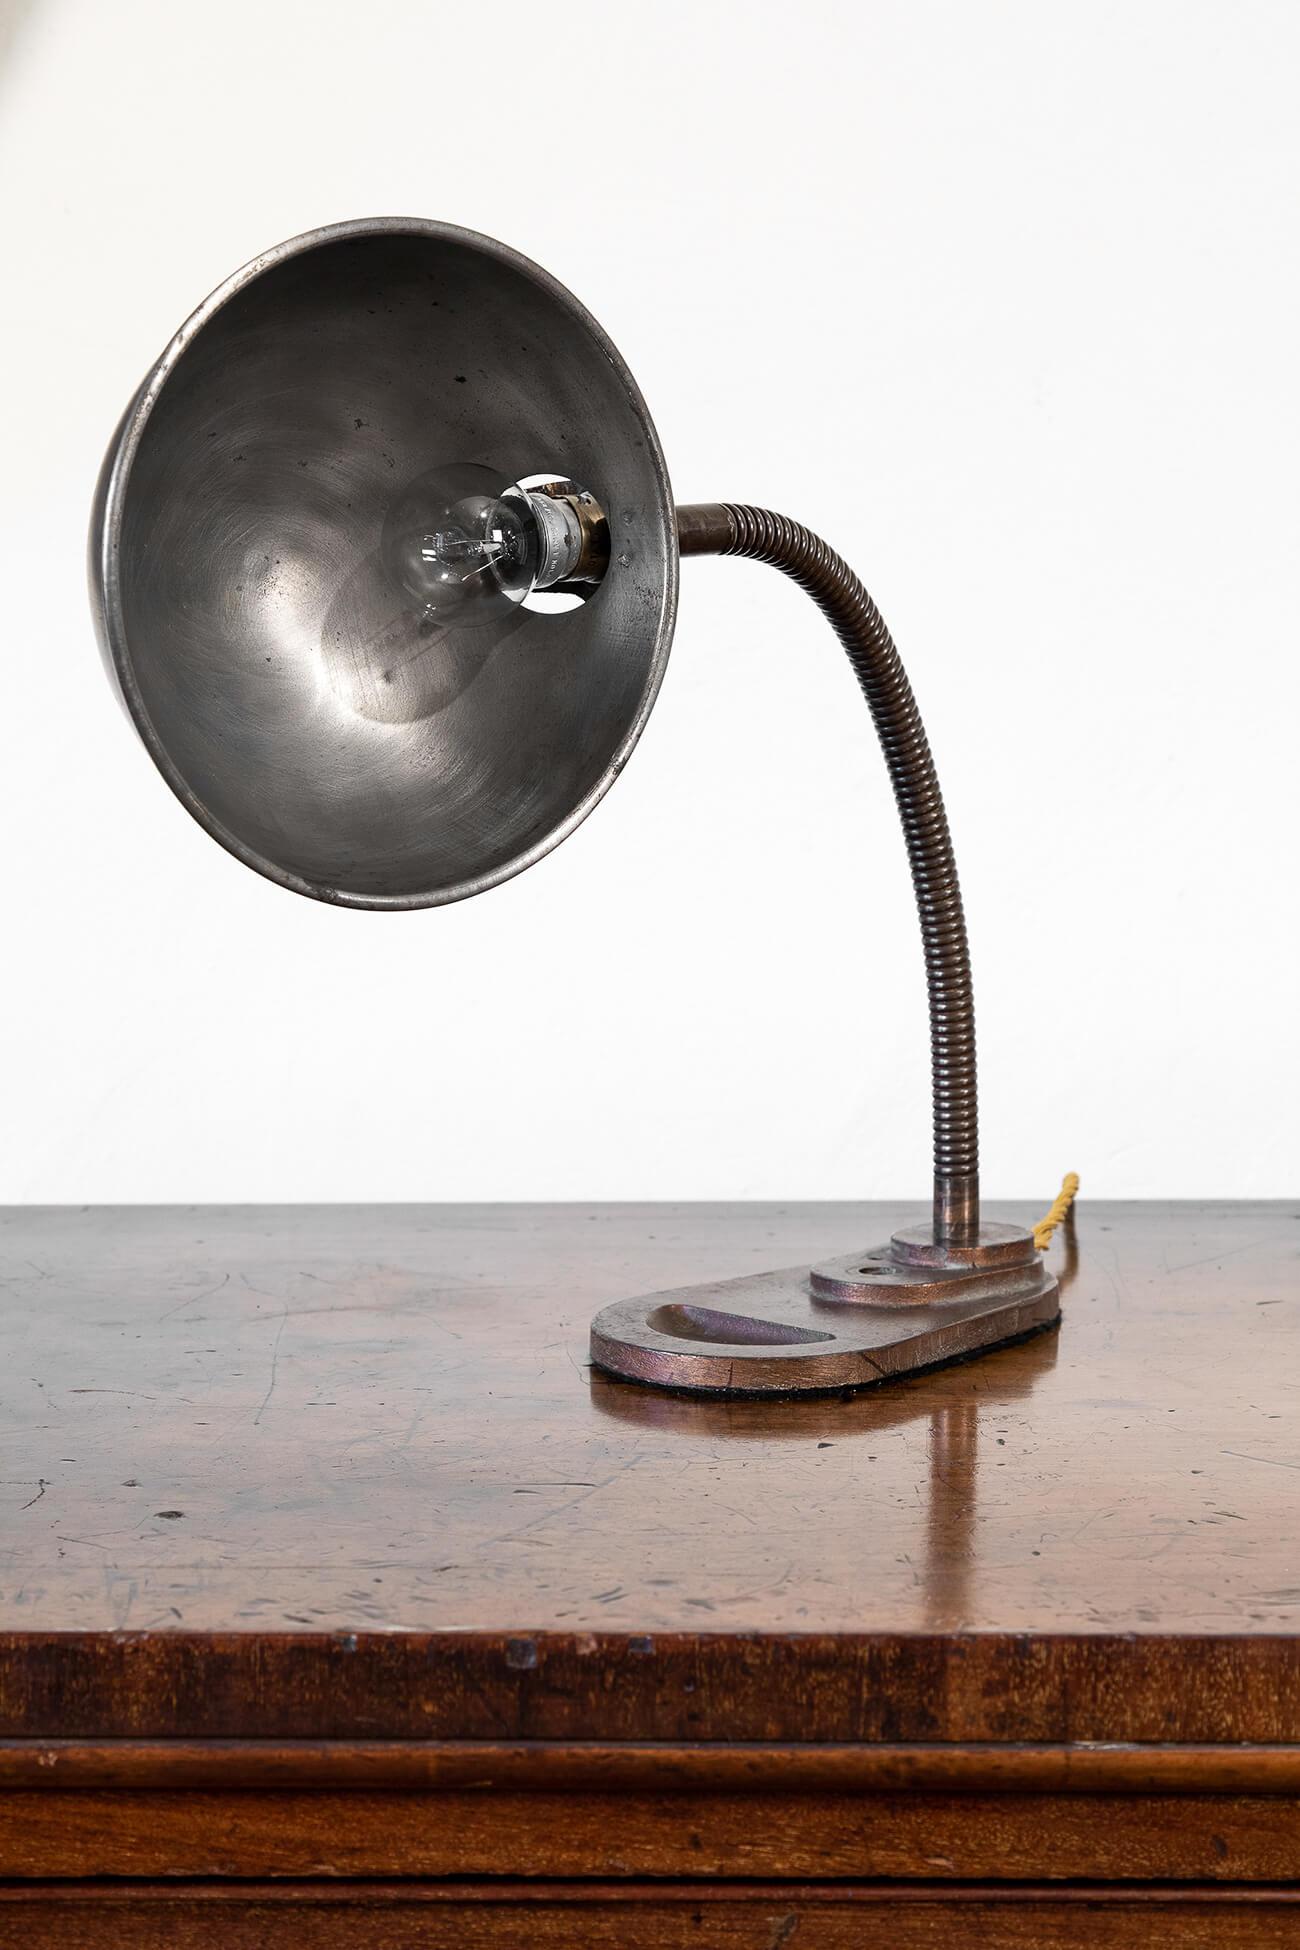 Original gooseneck industrial desk lamp. Cast iron base with flexible gooseneck stem and spun steel shade in its original finish. Twisted three-cord braided fabric cable in gold. The lamp can easily be converted for use in both the USA and